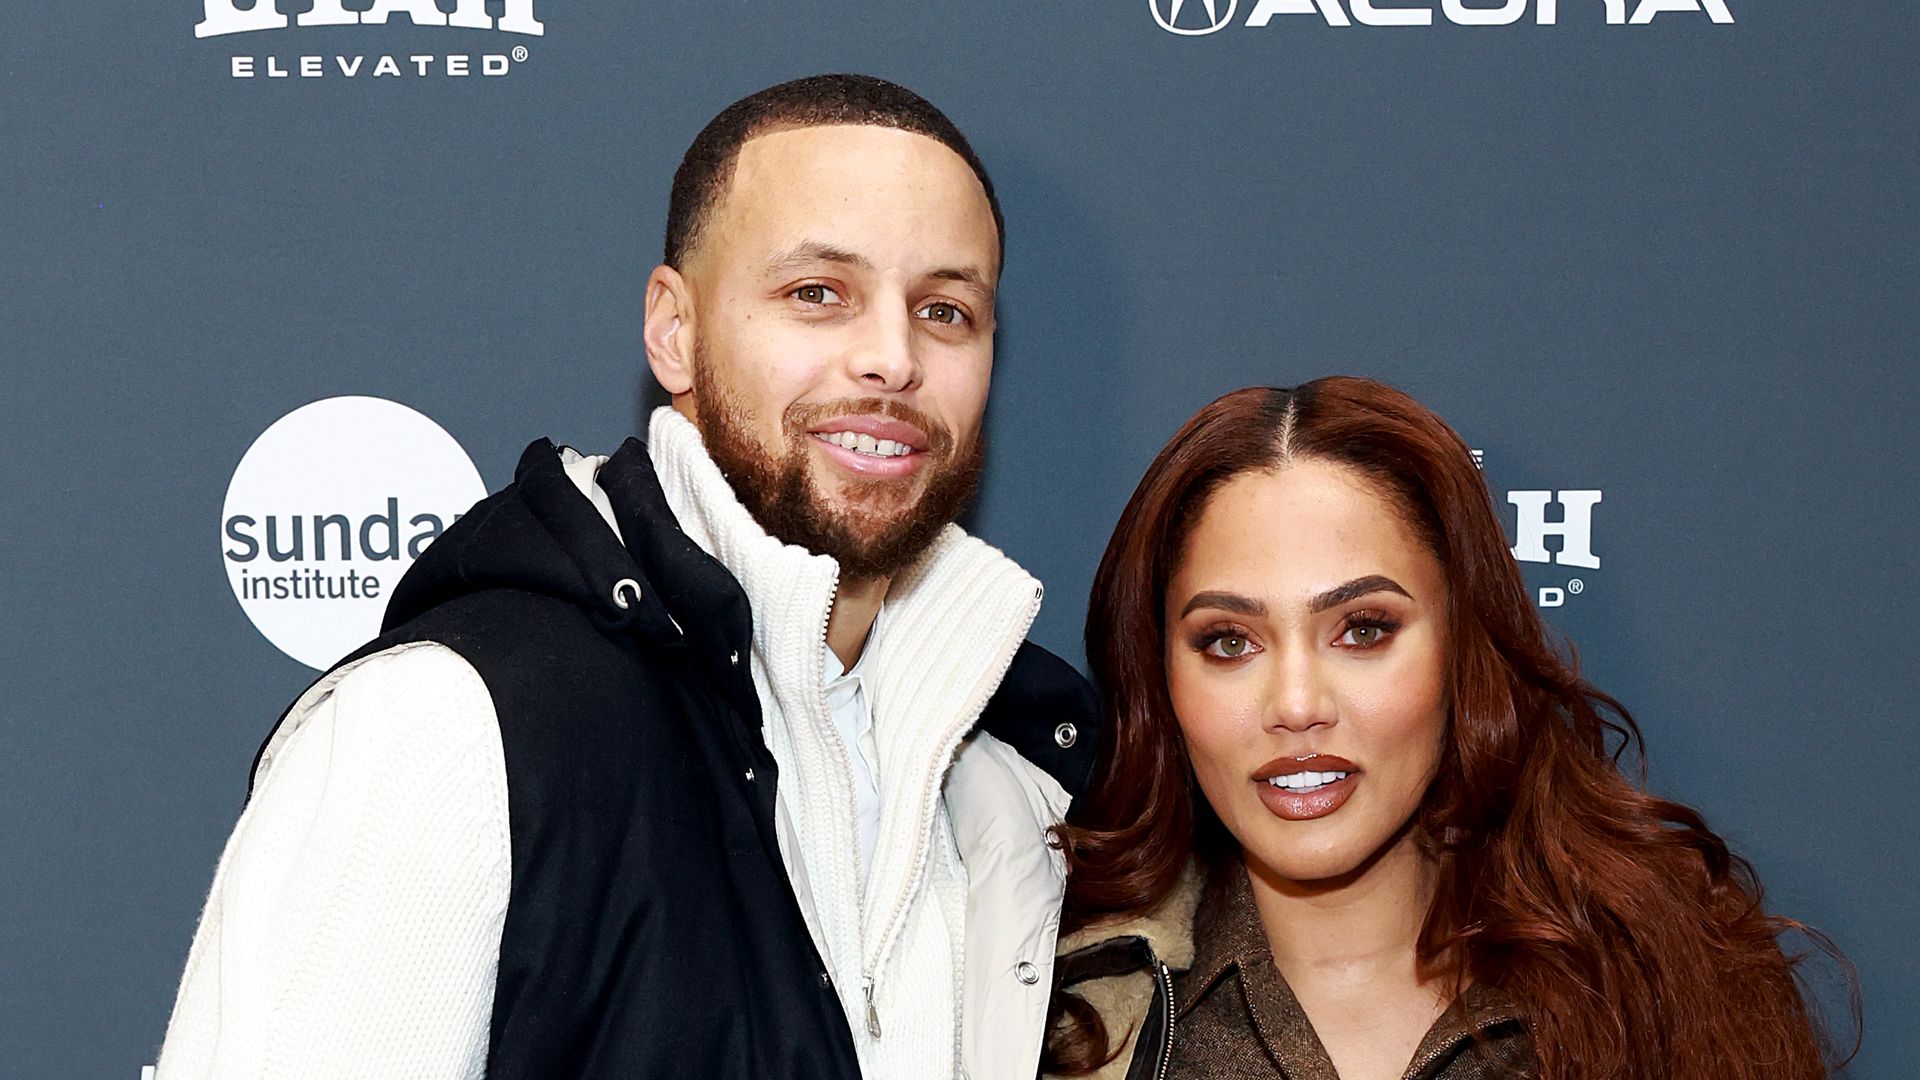 Stephen Curry and Ayesha Curry attend the 2023 Sundance Film Festival "Stephen Curry: Underrated" Premiere at Eccles Center Theatre on January 23, 2023 in Park City, Utah